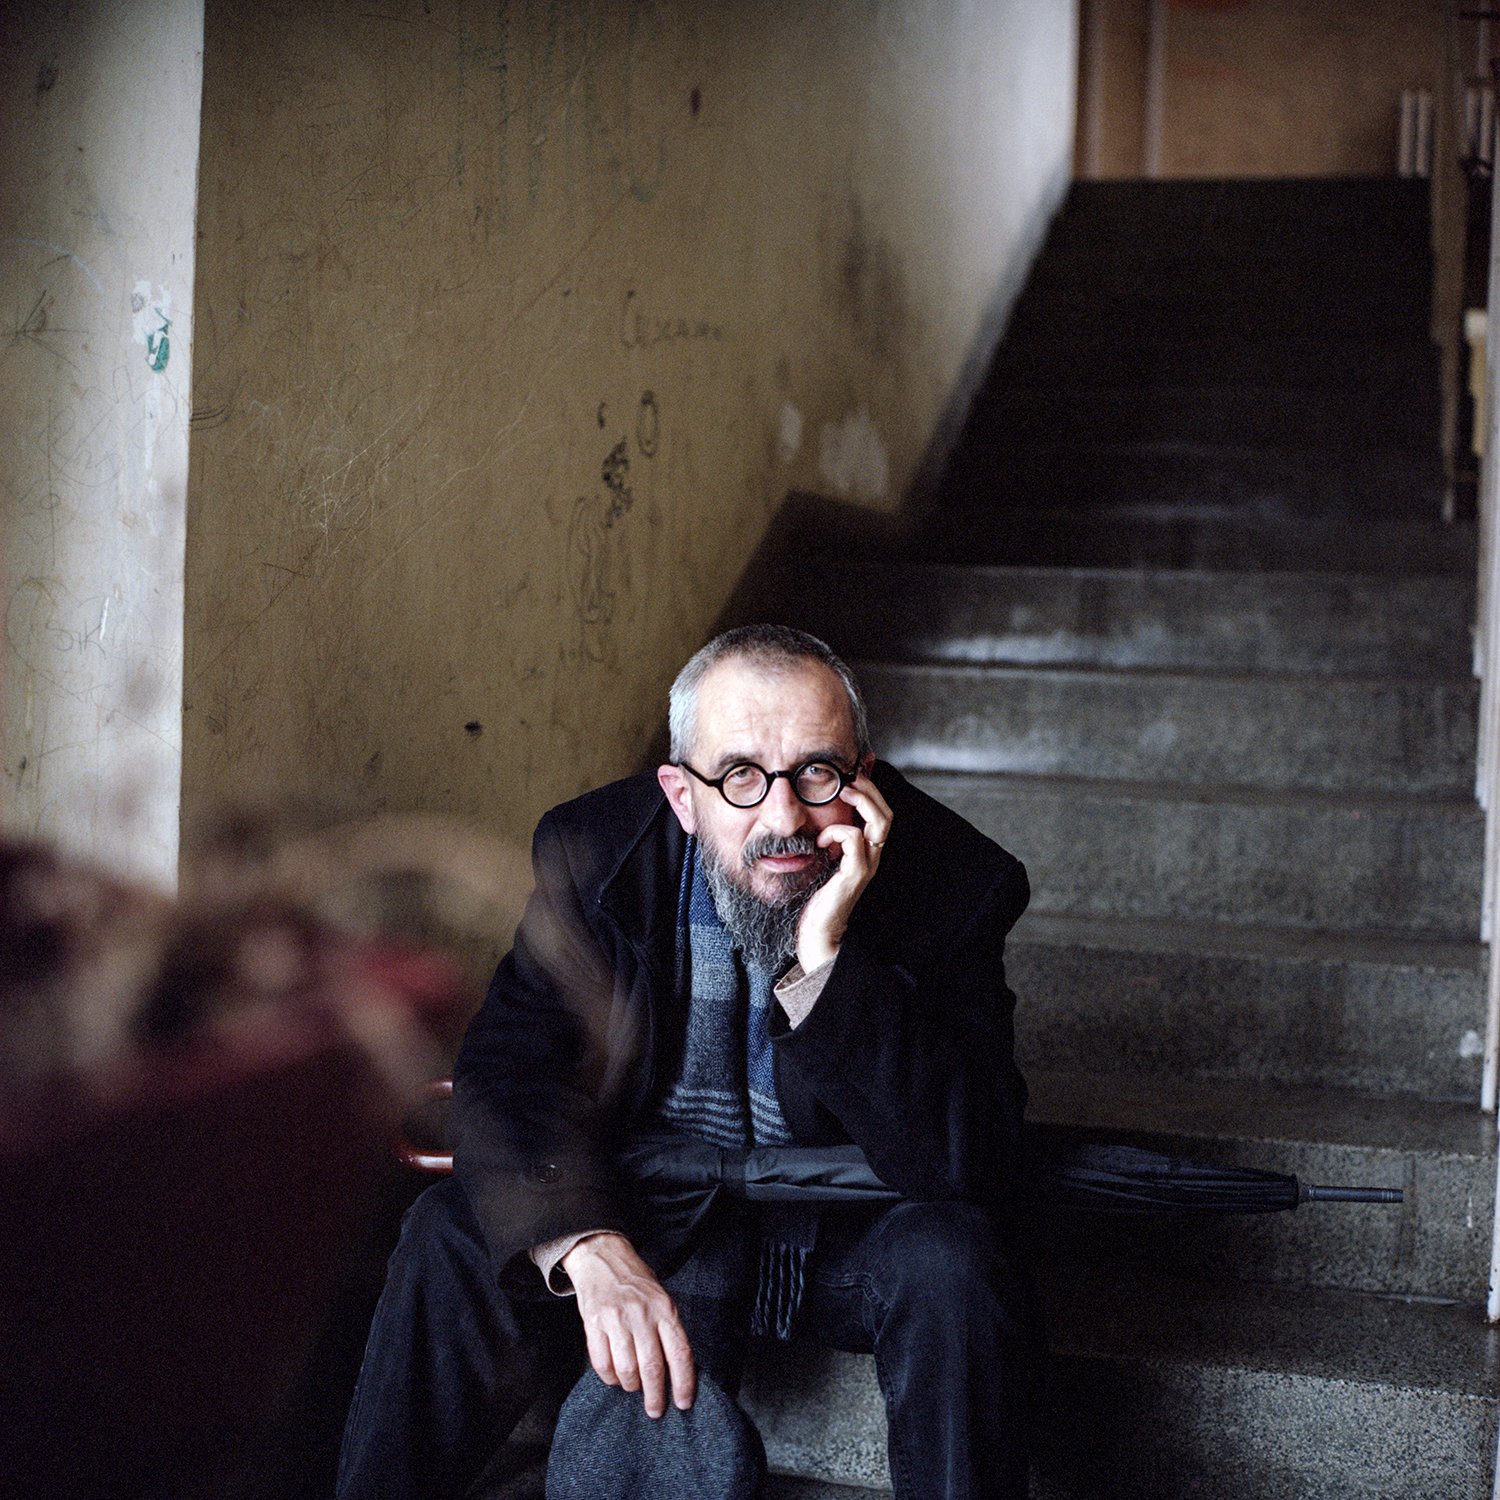 Darko Cvijetić, a Bosnian-Serb writer, filmmaker, and poet, renowned for his novel Schindler Lift, sits on staircase.